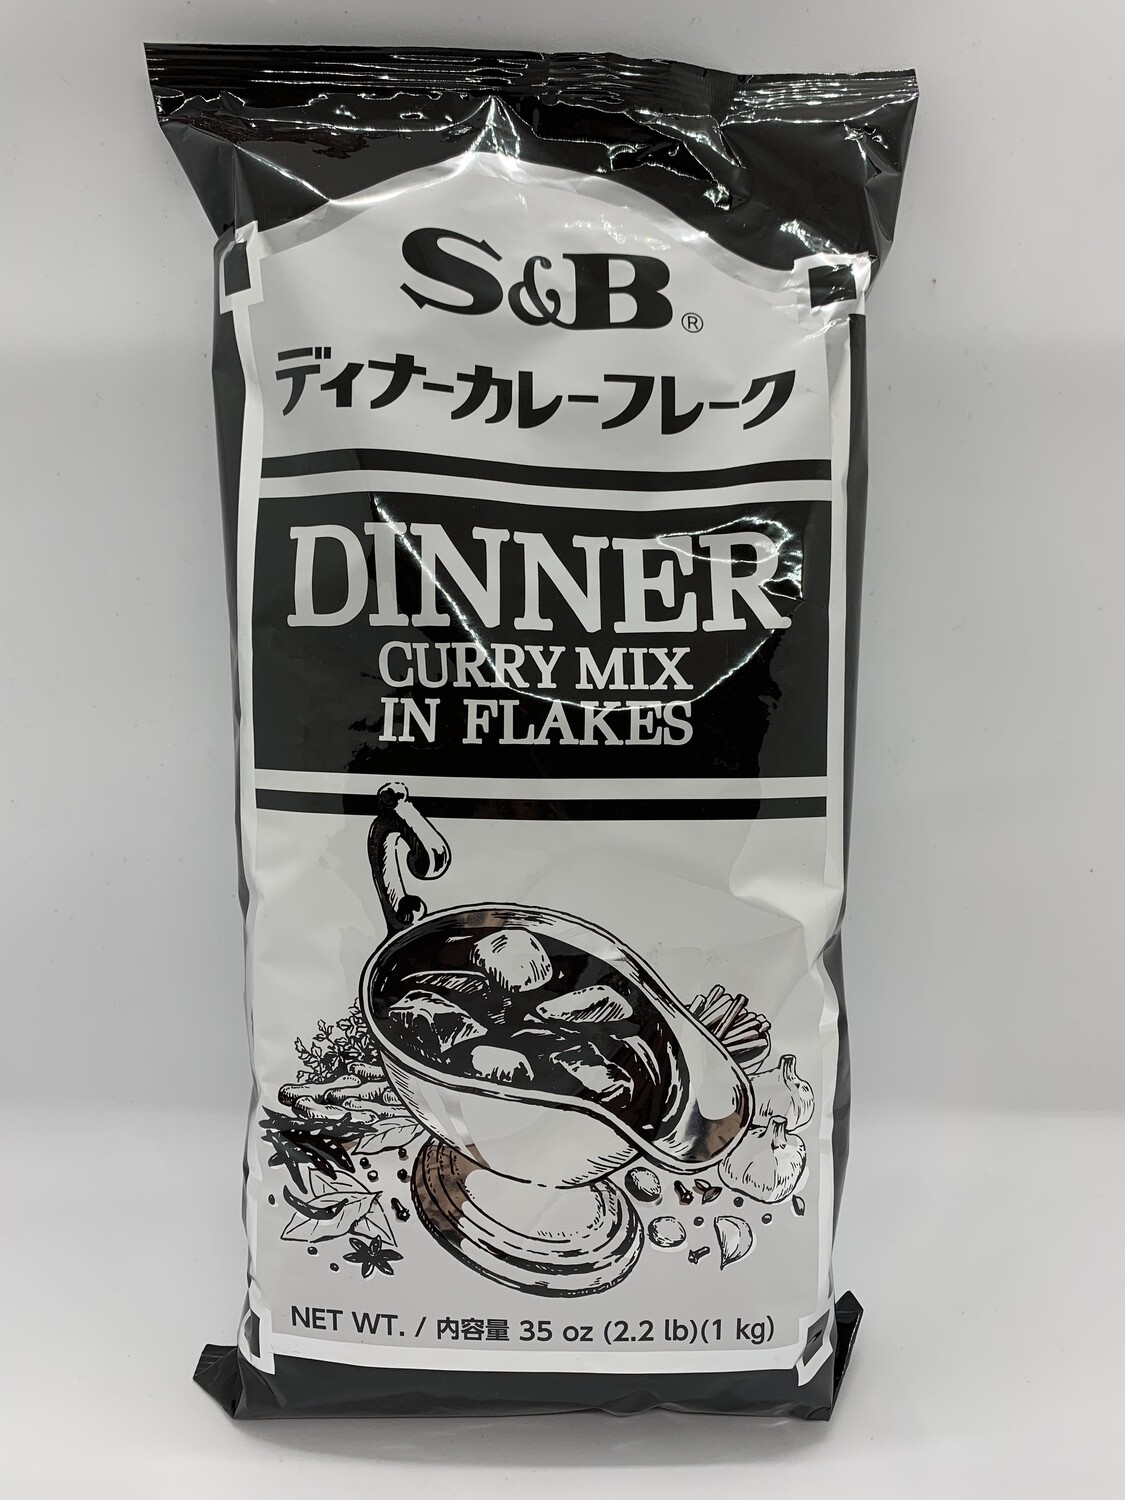 S&B Dinner Curry Mix 1kg